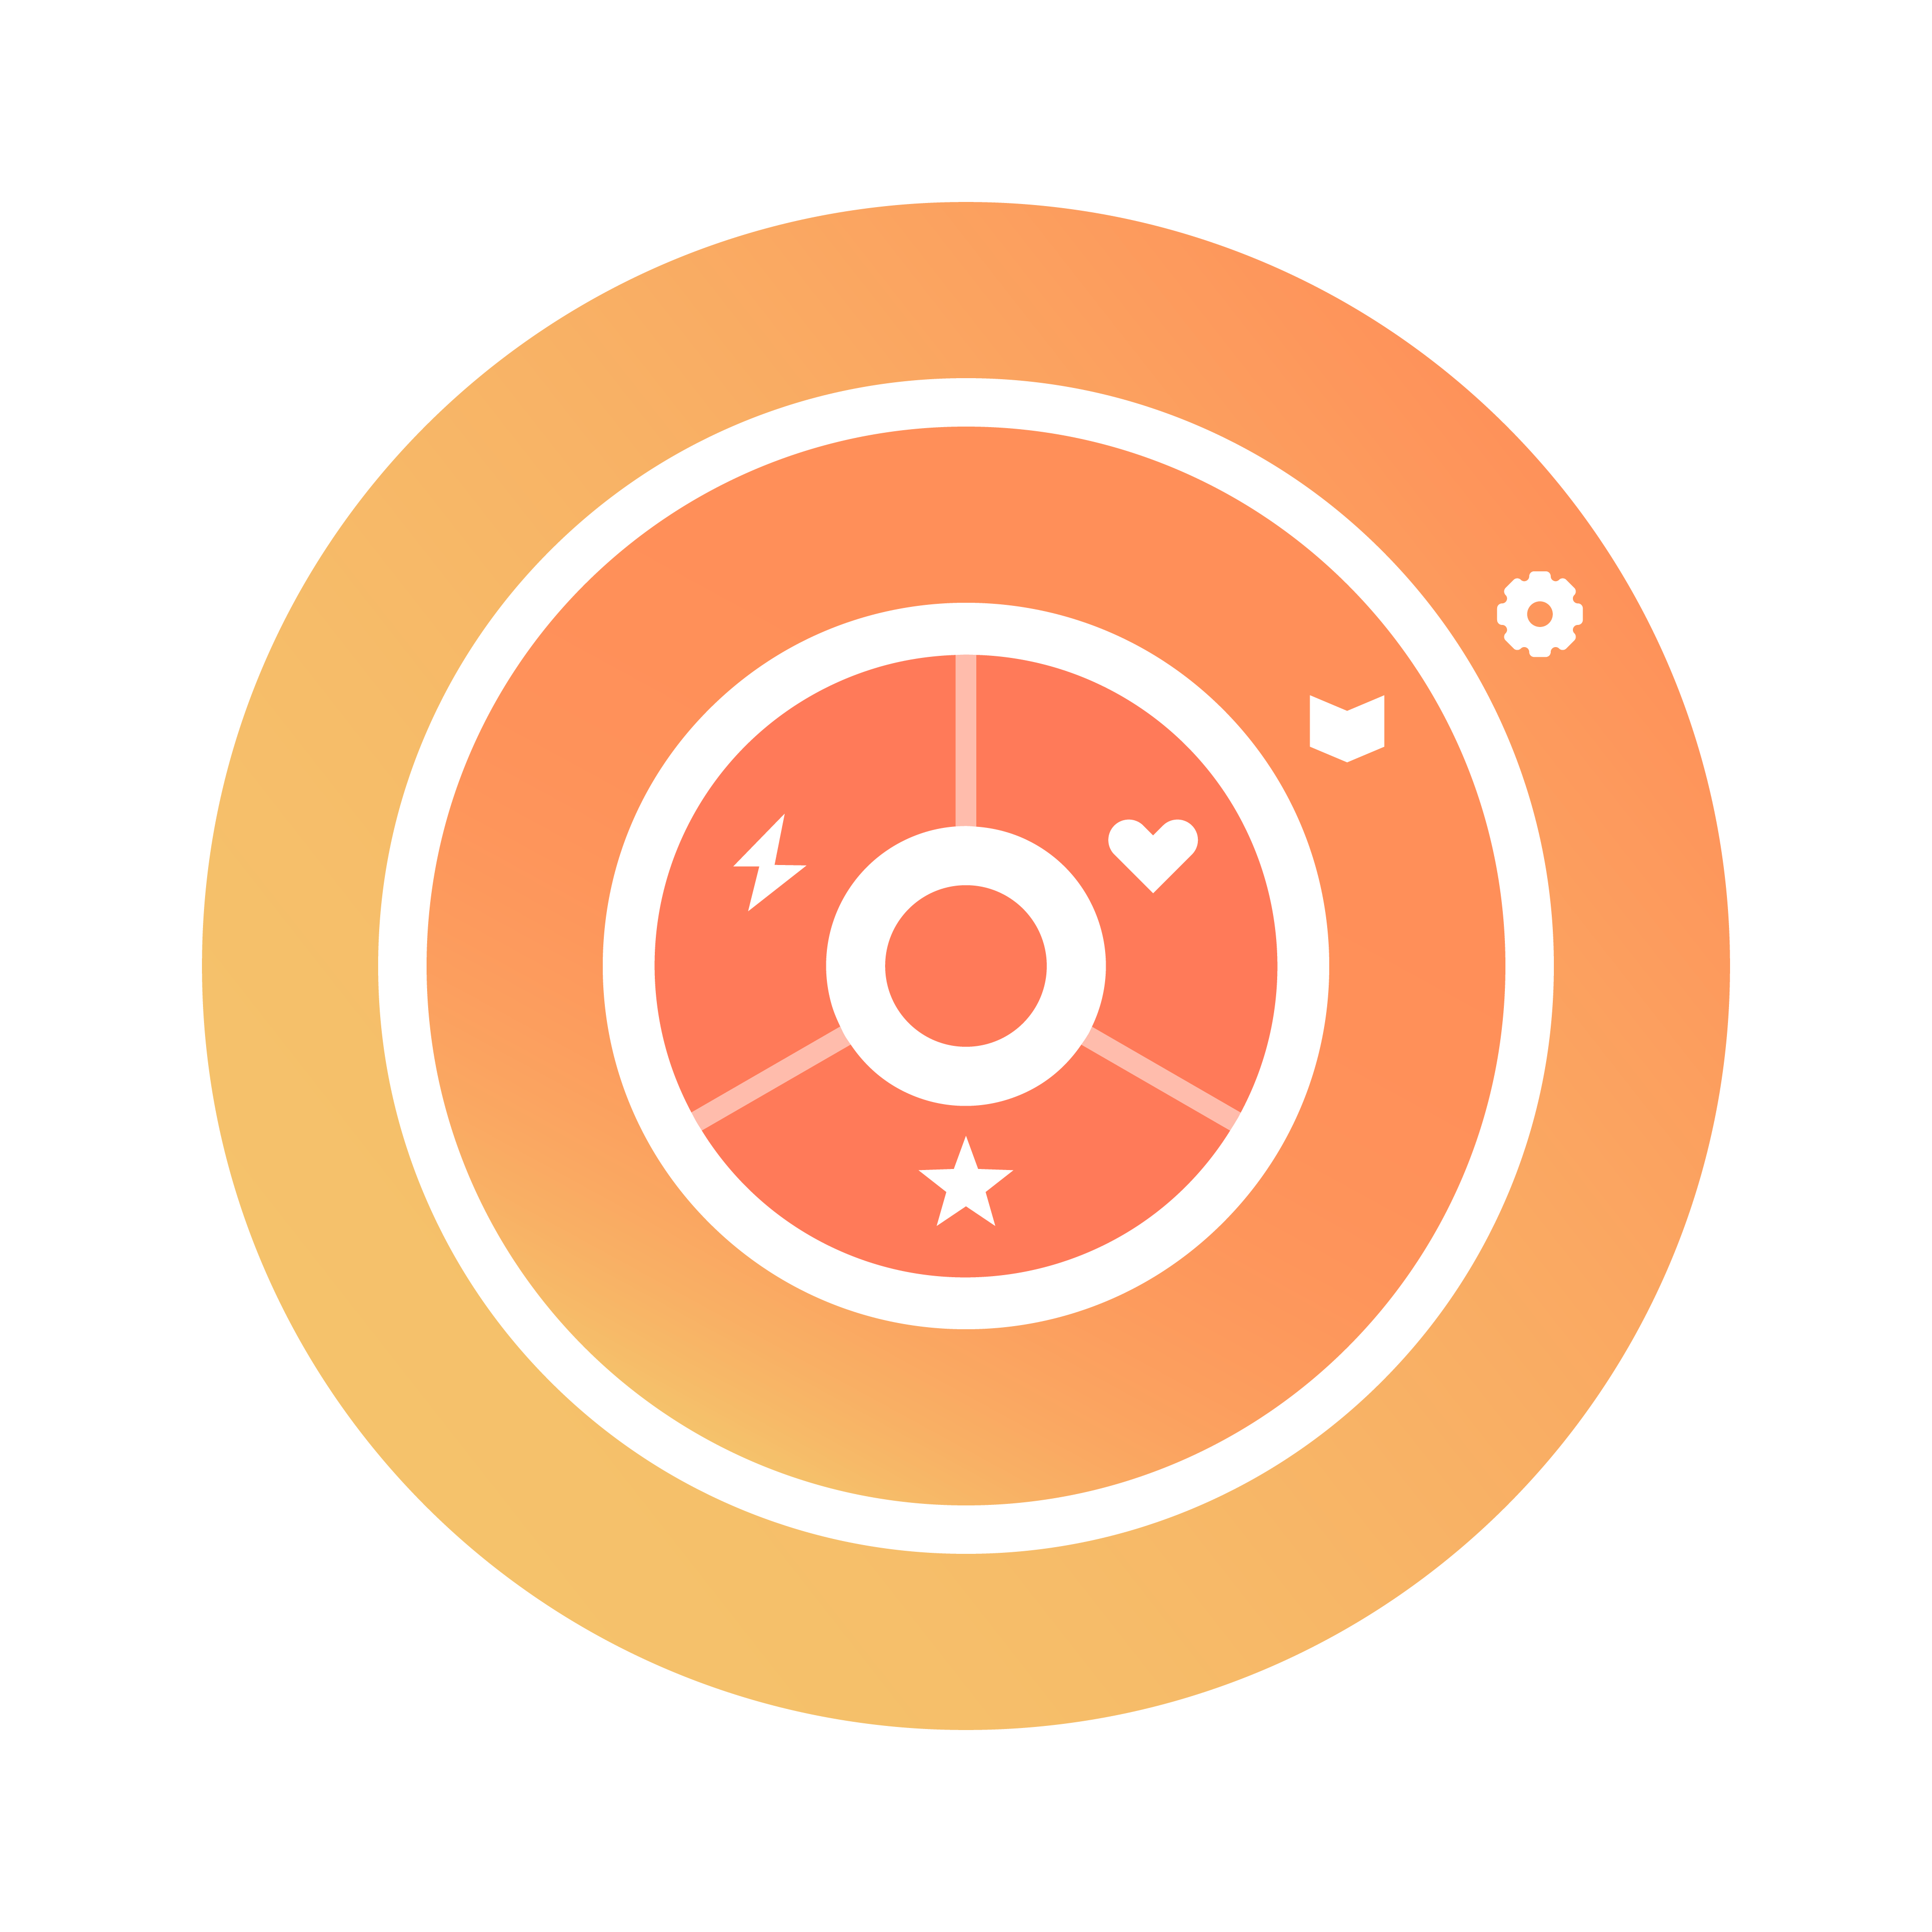 HubSpot product symbols placed in three expanding orange circles